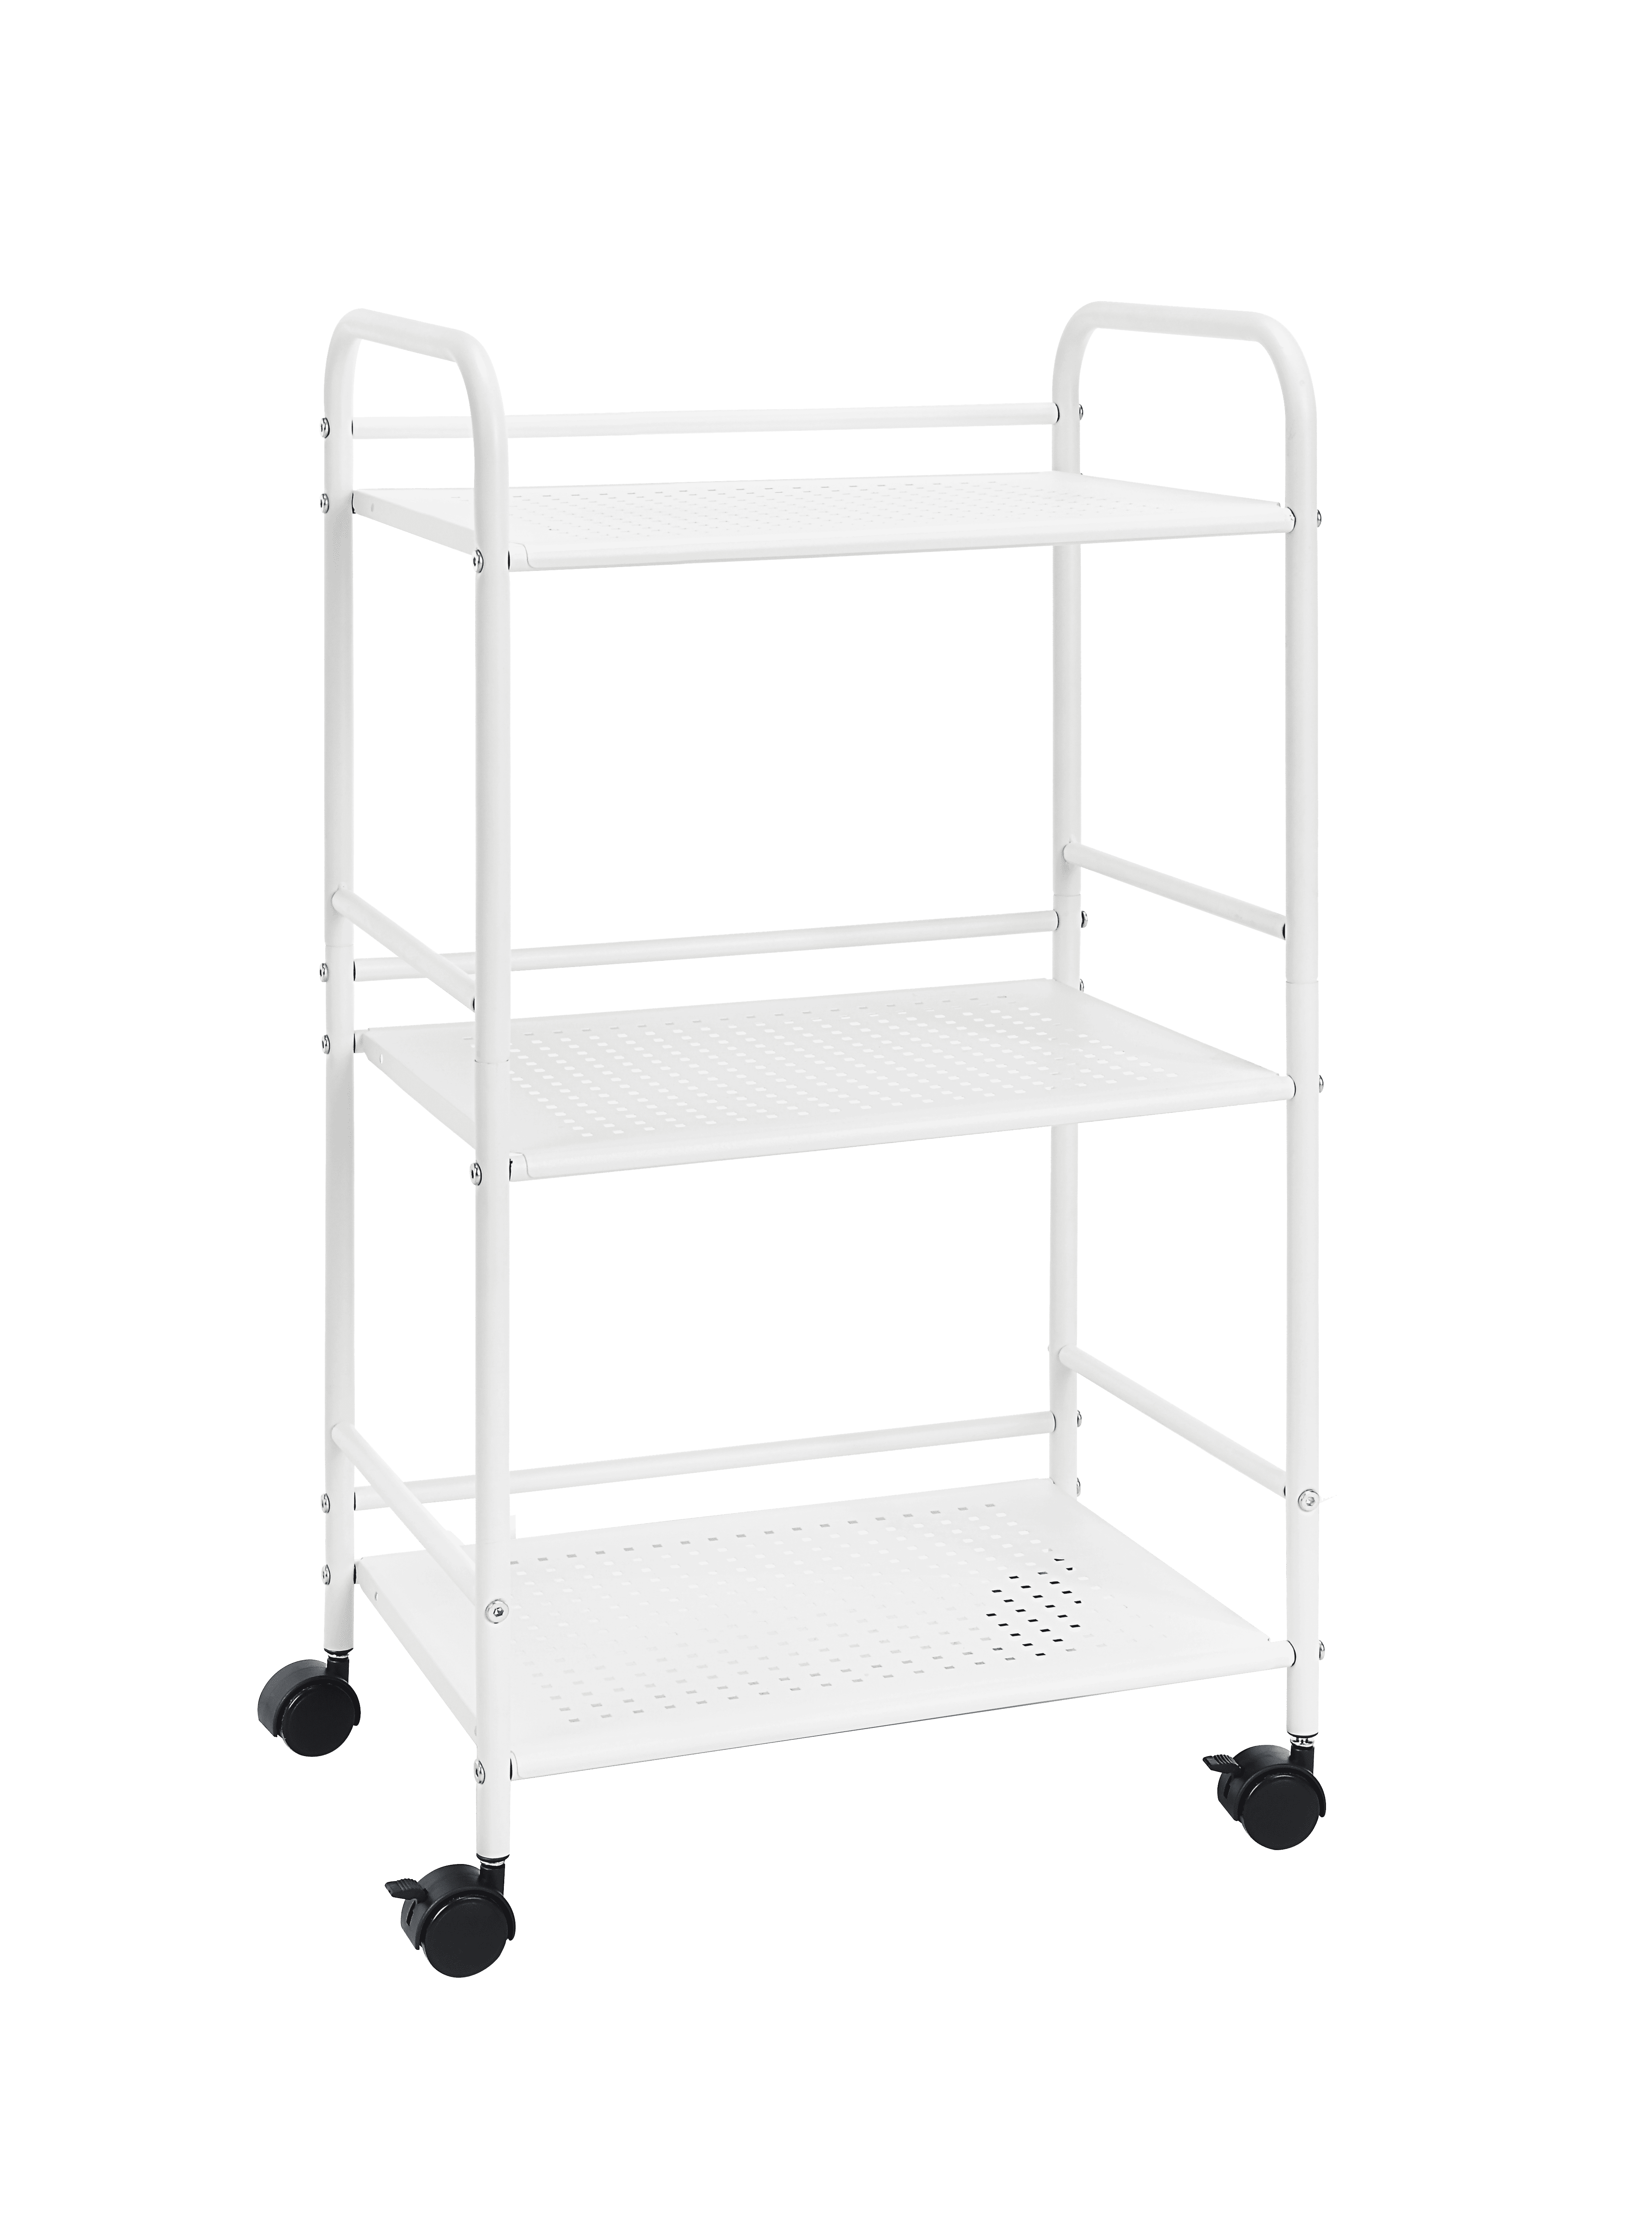 SunnyPoint 3-Tier Delicate Compact Rolling Metal Storage Organizer - Mobile  Utility Cart Kitchen/Under Desk Cart with Caster Wheels (Turq, Compact